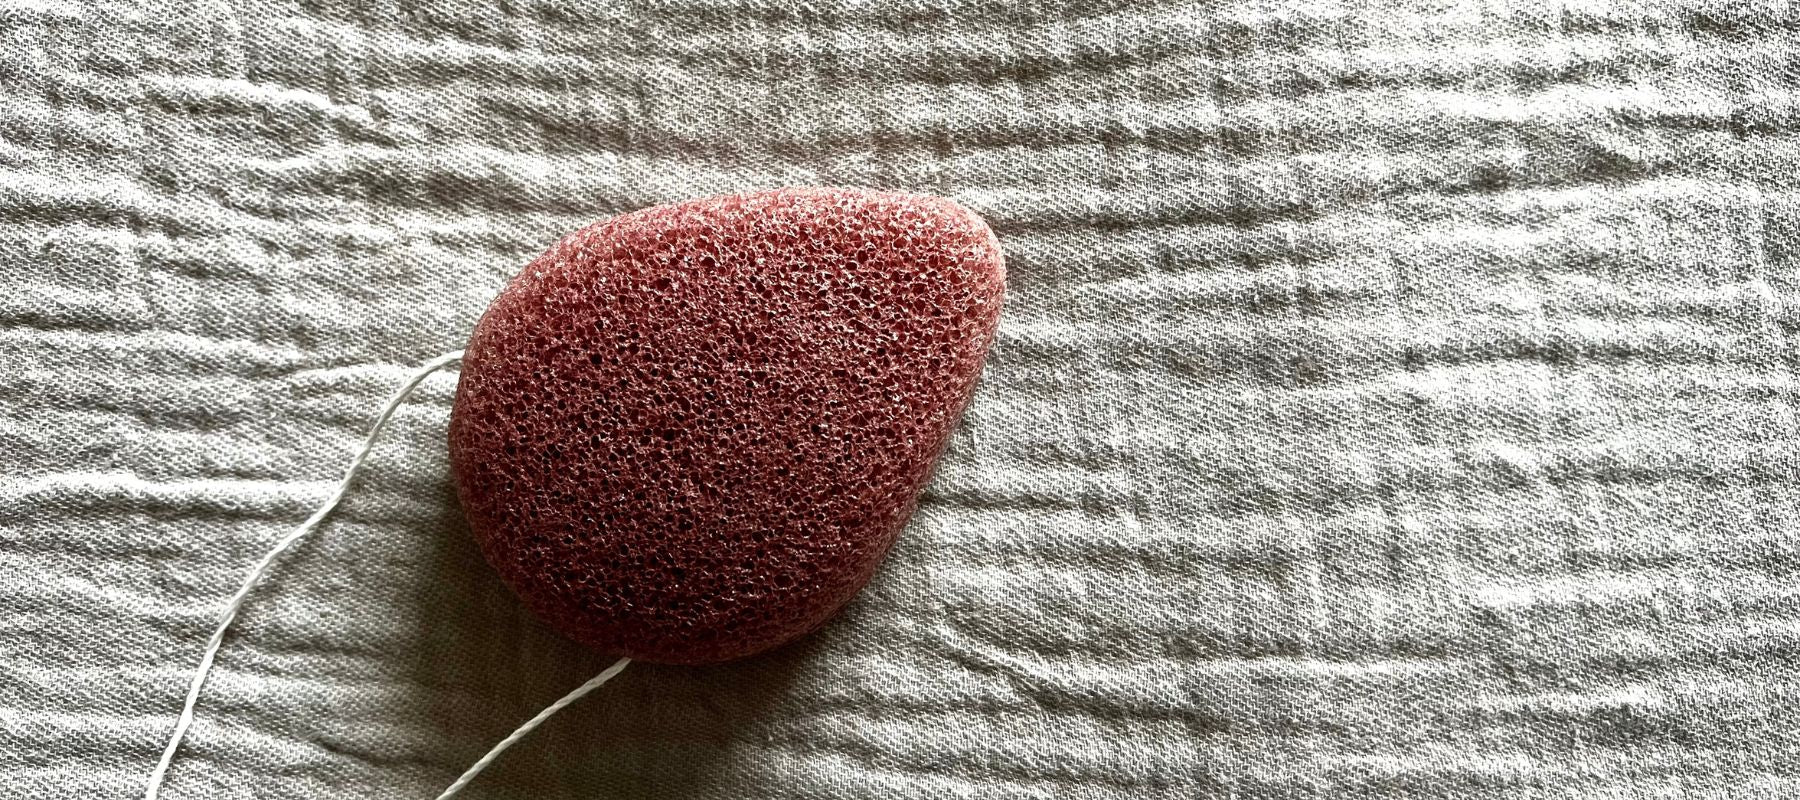 Tear shaped French pink clay konjac sponge for sensitive skin lying on a textured background.